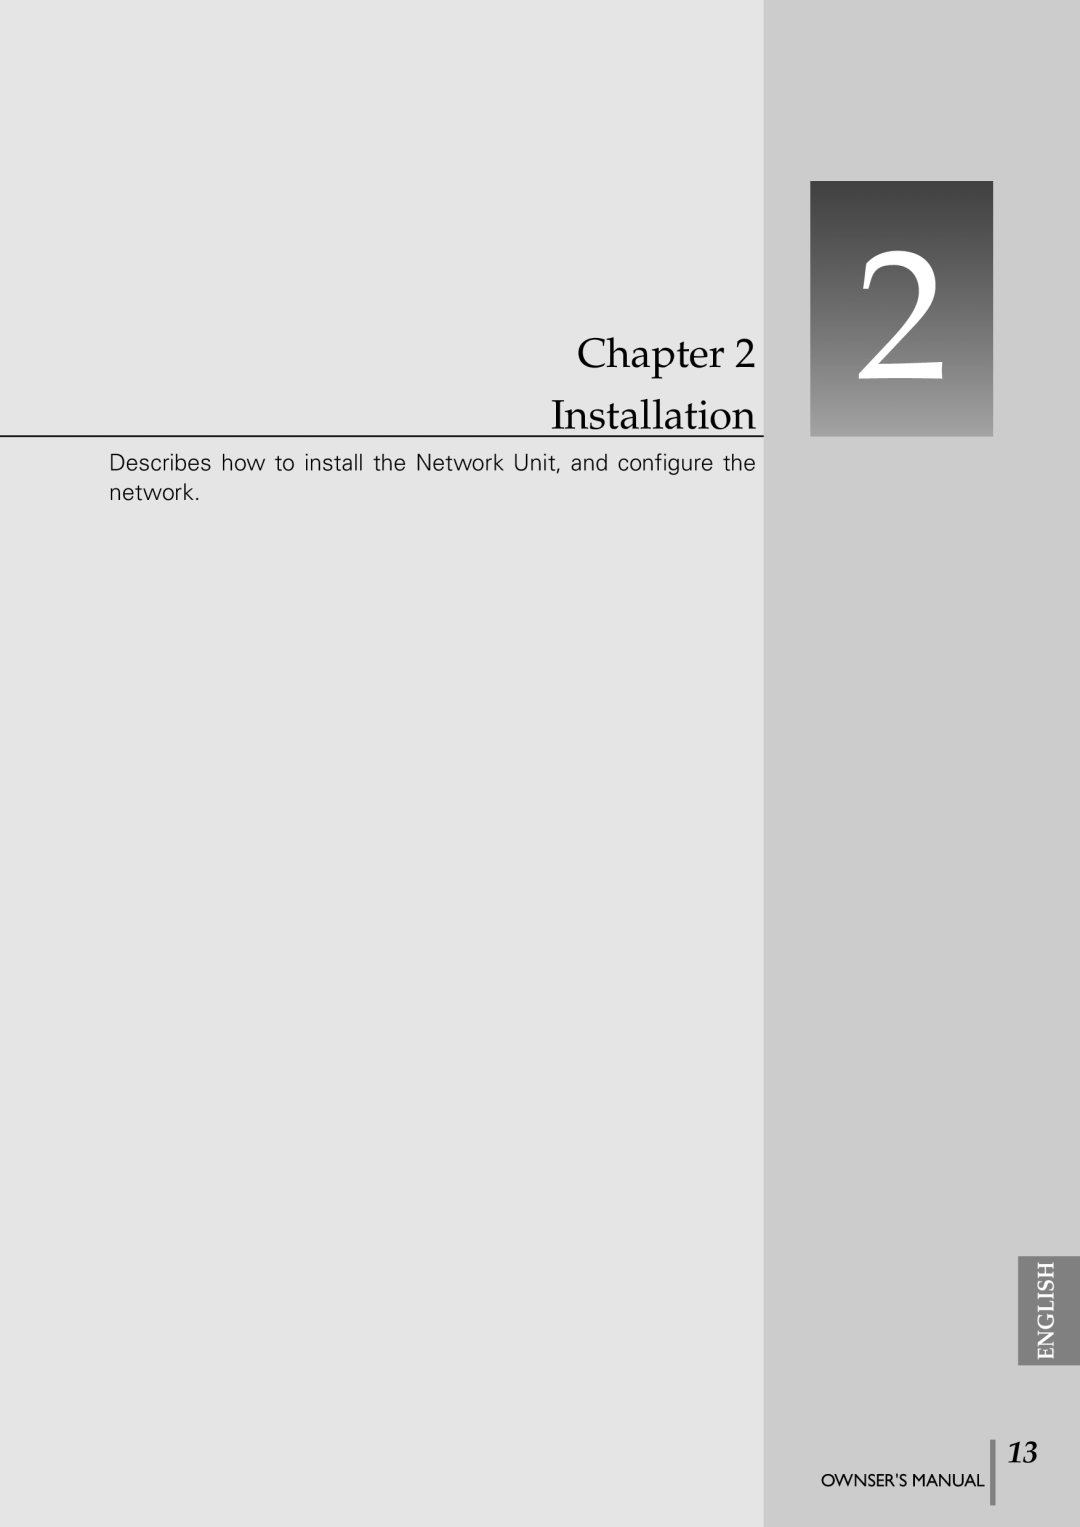 Eiki PJNET-300 Chapter Installation, Describes how to install the Network Unit, and configure the network, English 